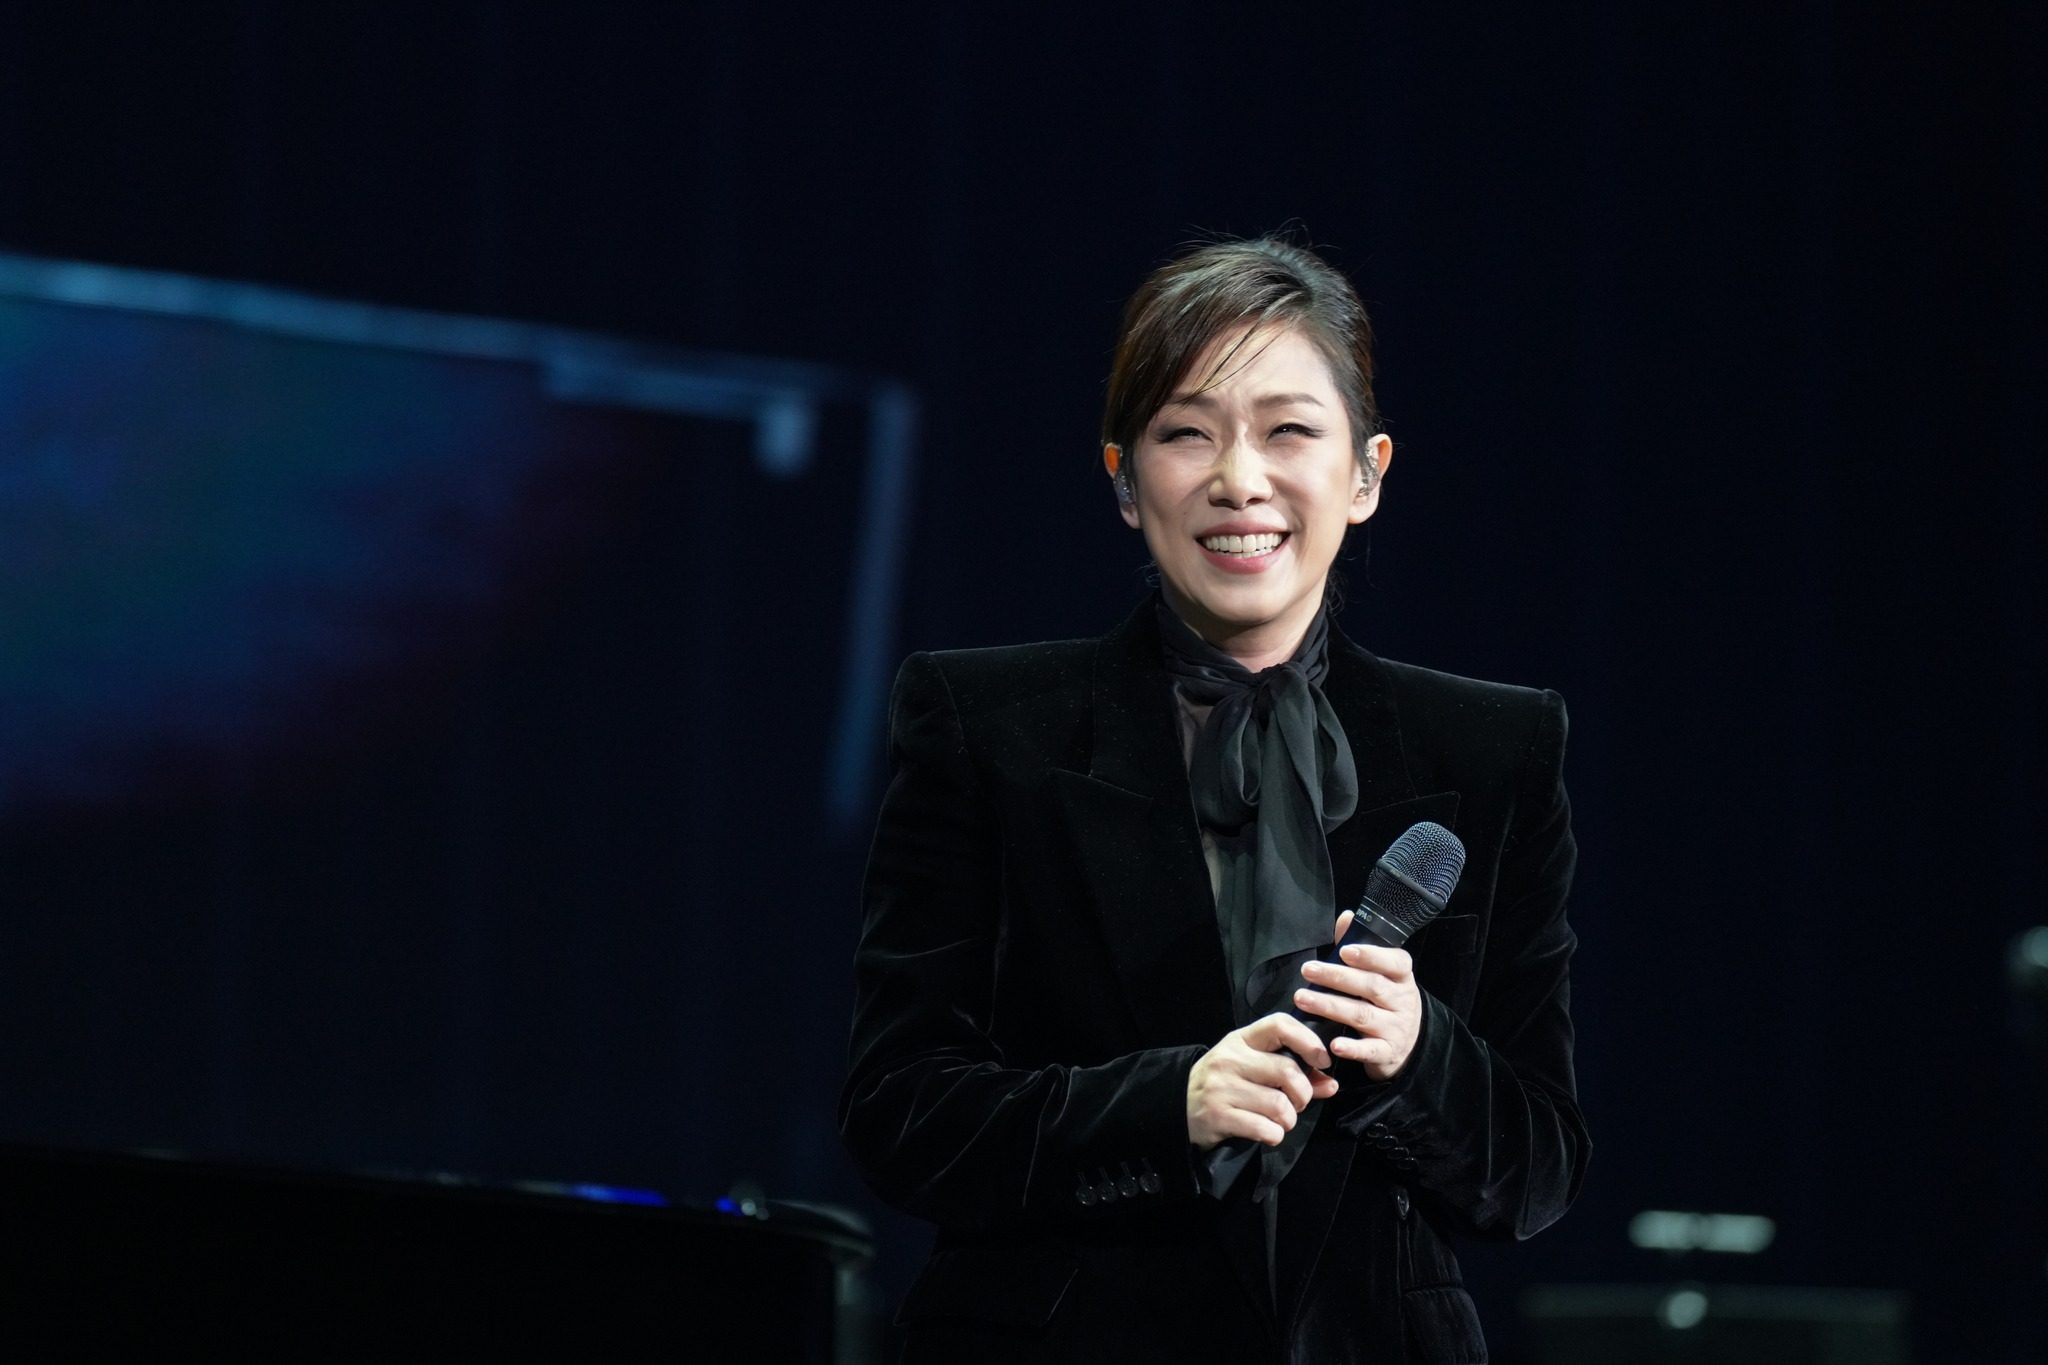 Sandy Lam (above) was star guest at the HK Phil’s three 50th anniversary shows at the Hong Kong Coliseum in April. She was joined by joined by singer-songwriter Anthony Lun and Cantopop singers Frances Yip and Elisa Chan. Photo: Hong Kong Philharmonic Orchestra